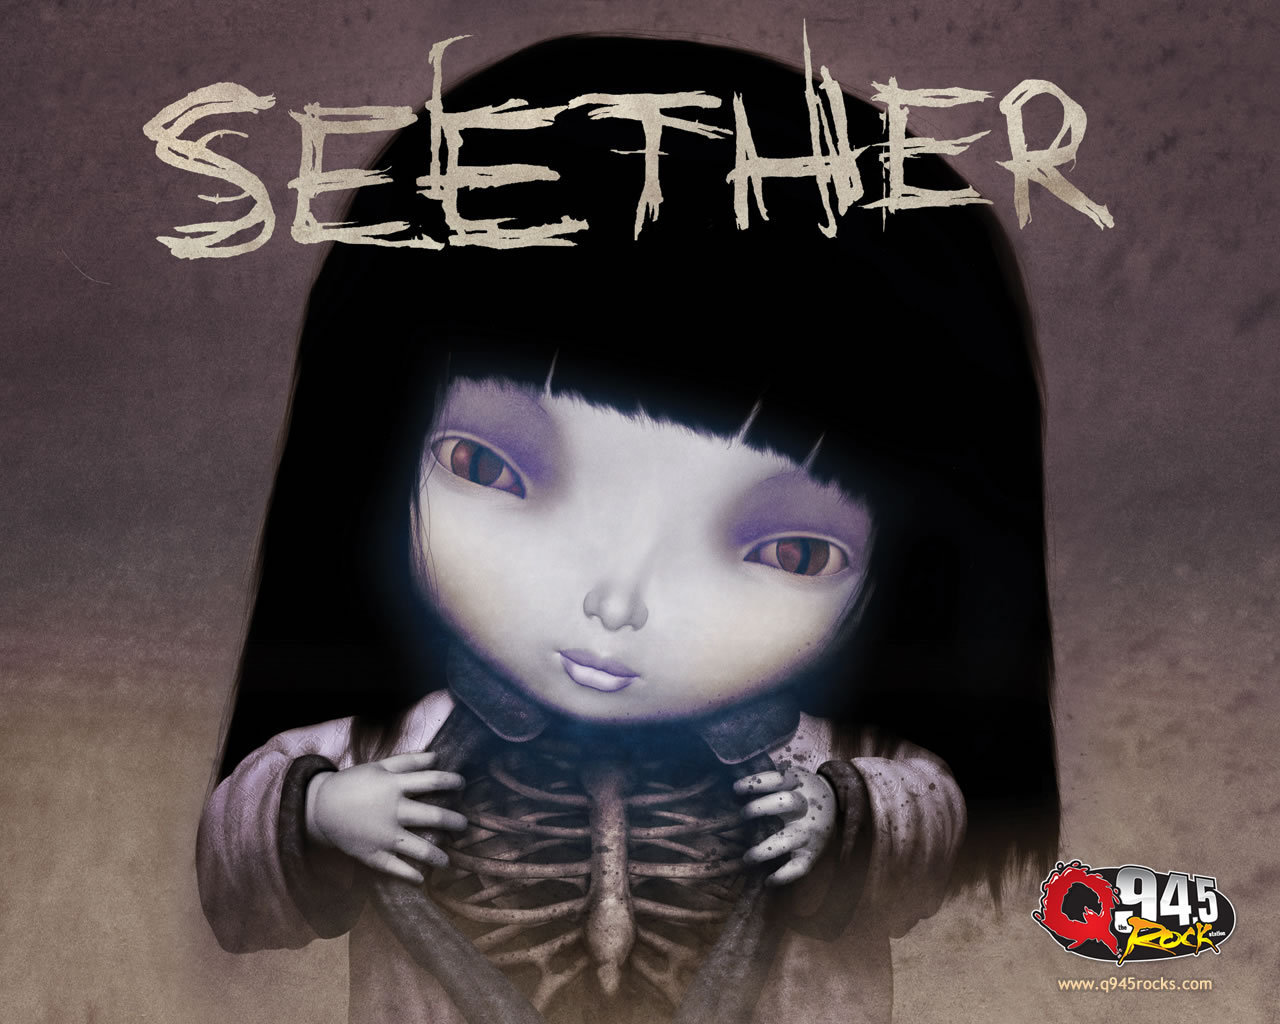 Seether - Seether Finding Beauty In Negative Spaces - HD Wallpaper 